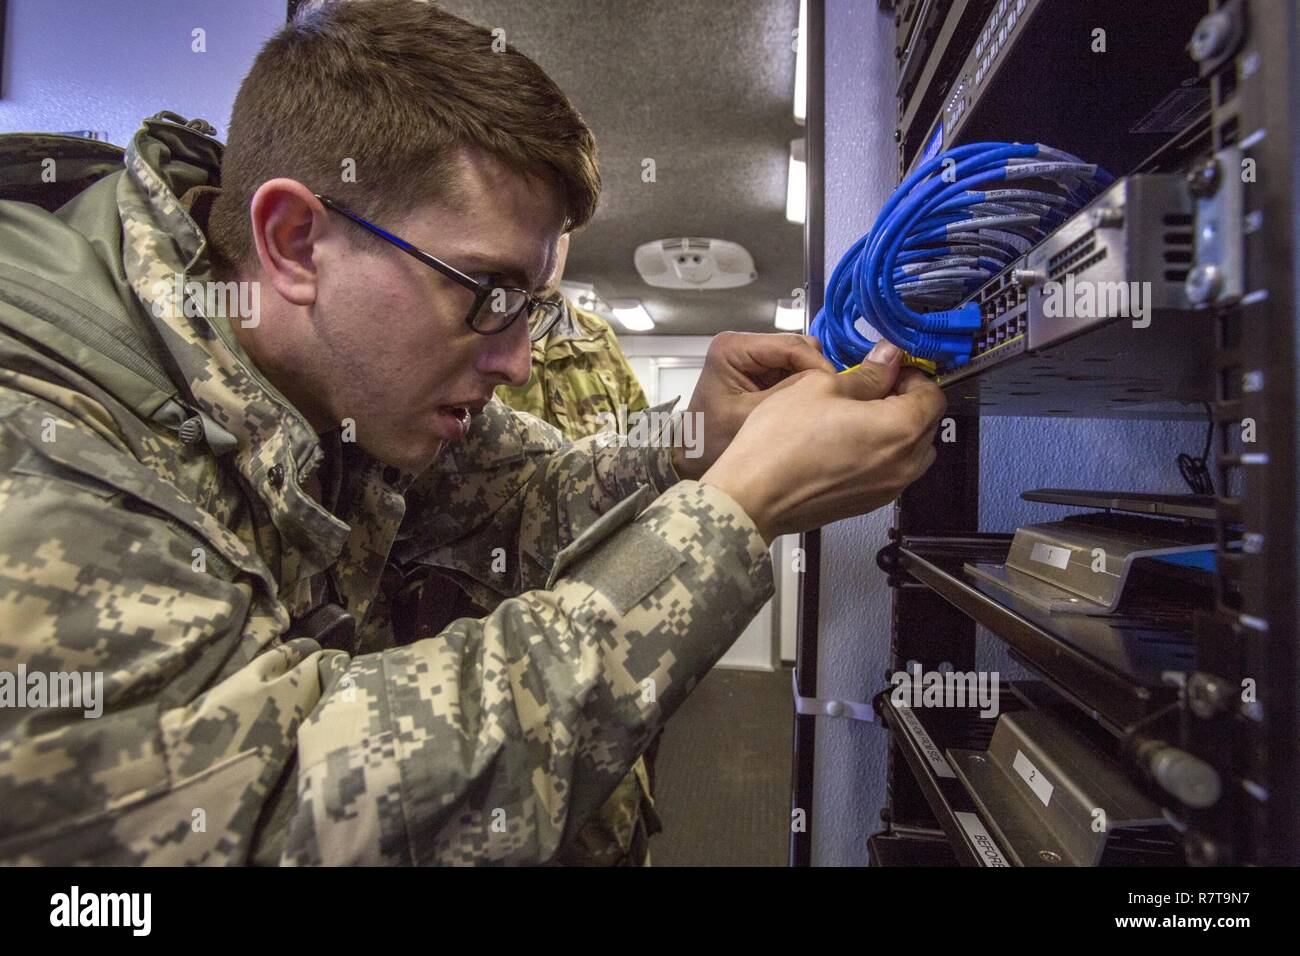 Staff Sgt. Chris M. Maute with the New Jersey National Guard's 21st Weapons of Mass Destruction-Civil Support Team, connects server cables during a joint training exercise with members of the Monmouth County Hazmat team at Fort Monmouth, N.J., April 6, 2017. The 21st WMD-CST is a joint unit comprised of New Jersey National Guard Soldiers and Airmen whose mission is to support civil authorities by identifying chemical, biological, radiological, and nuclear substances in either man-made or natural disasters. (New Jersey National Guard Stock Photo